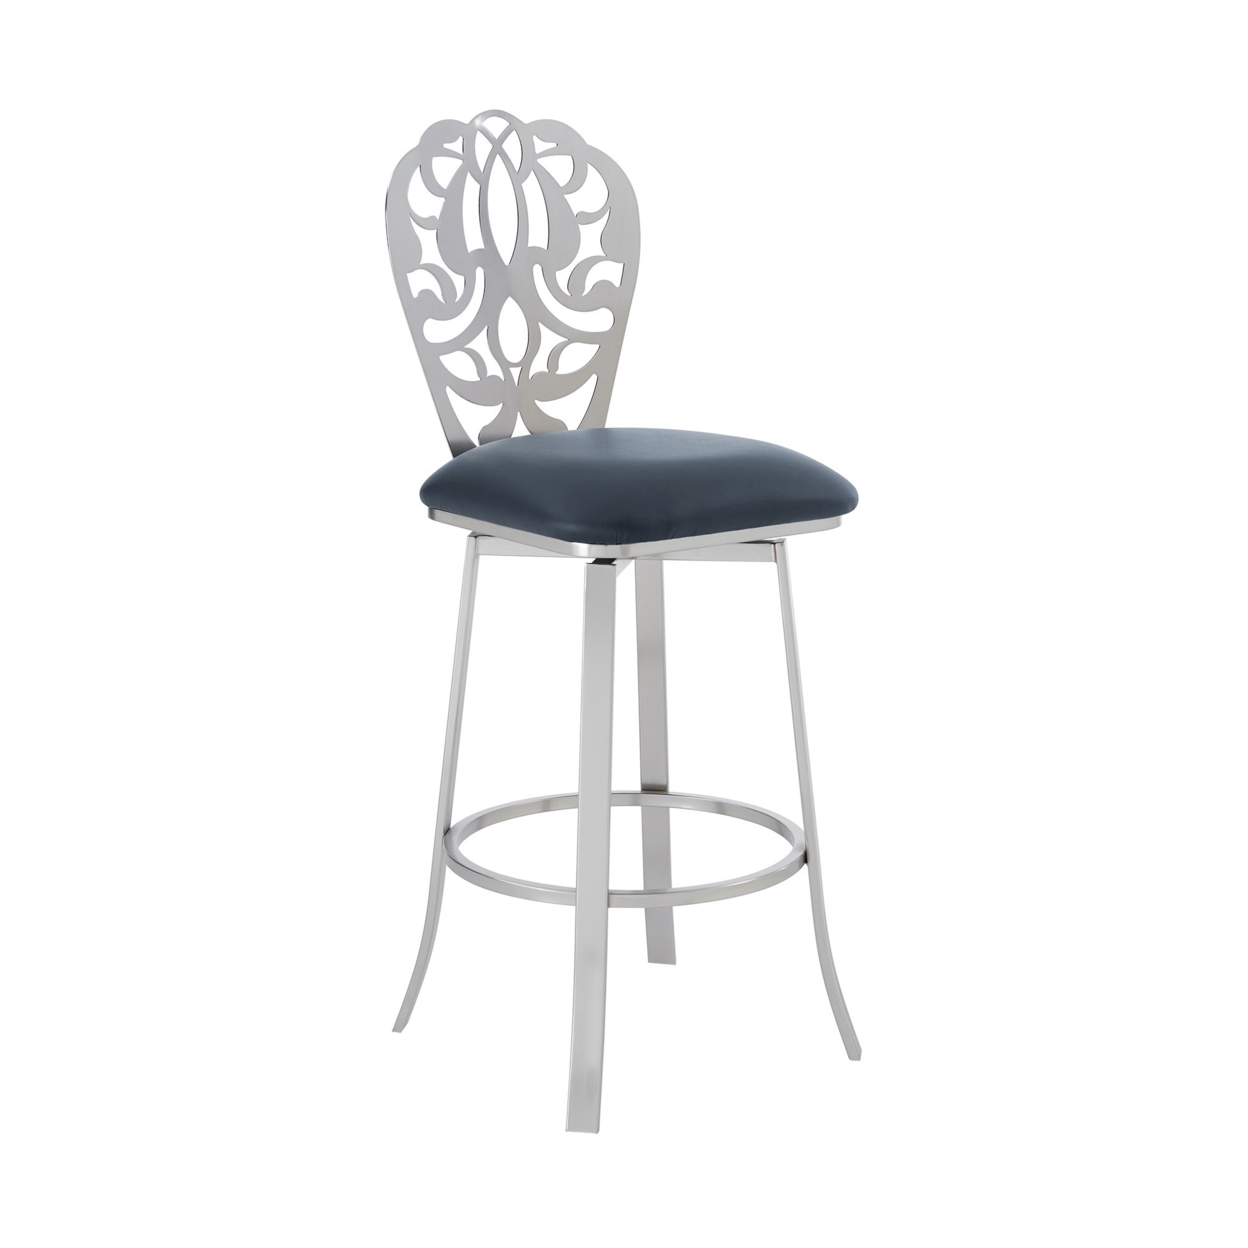 30 Inches Leatherette Barstool With Ornate Cut Out, Gray- Saltoro Sherpi